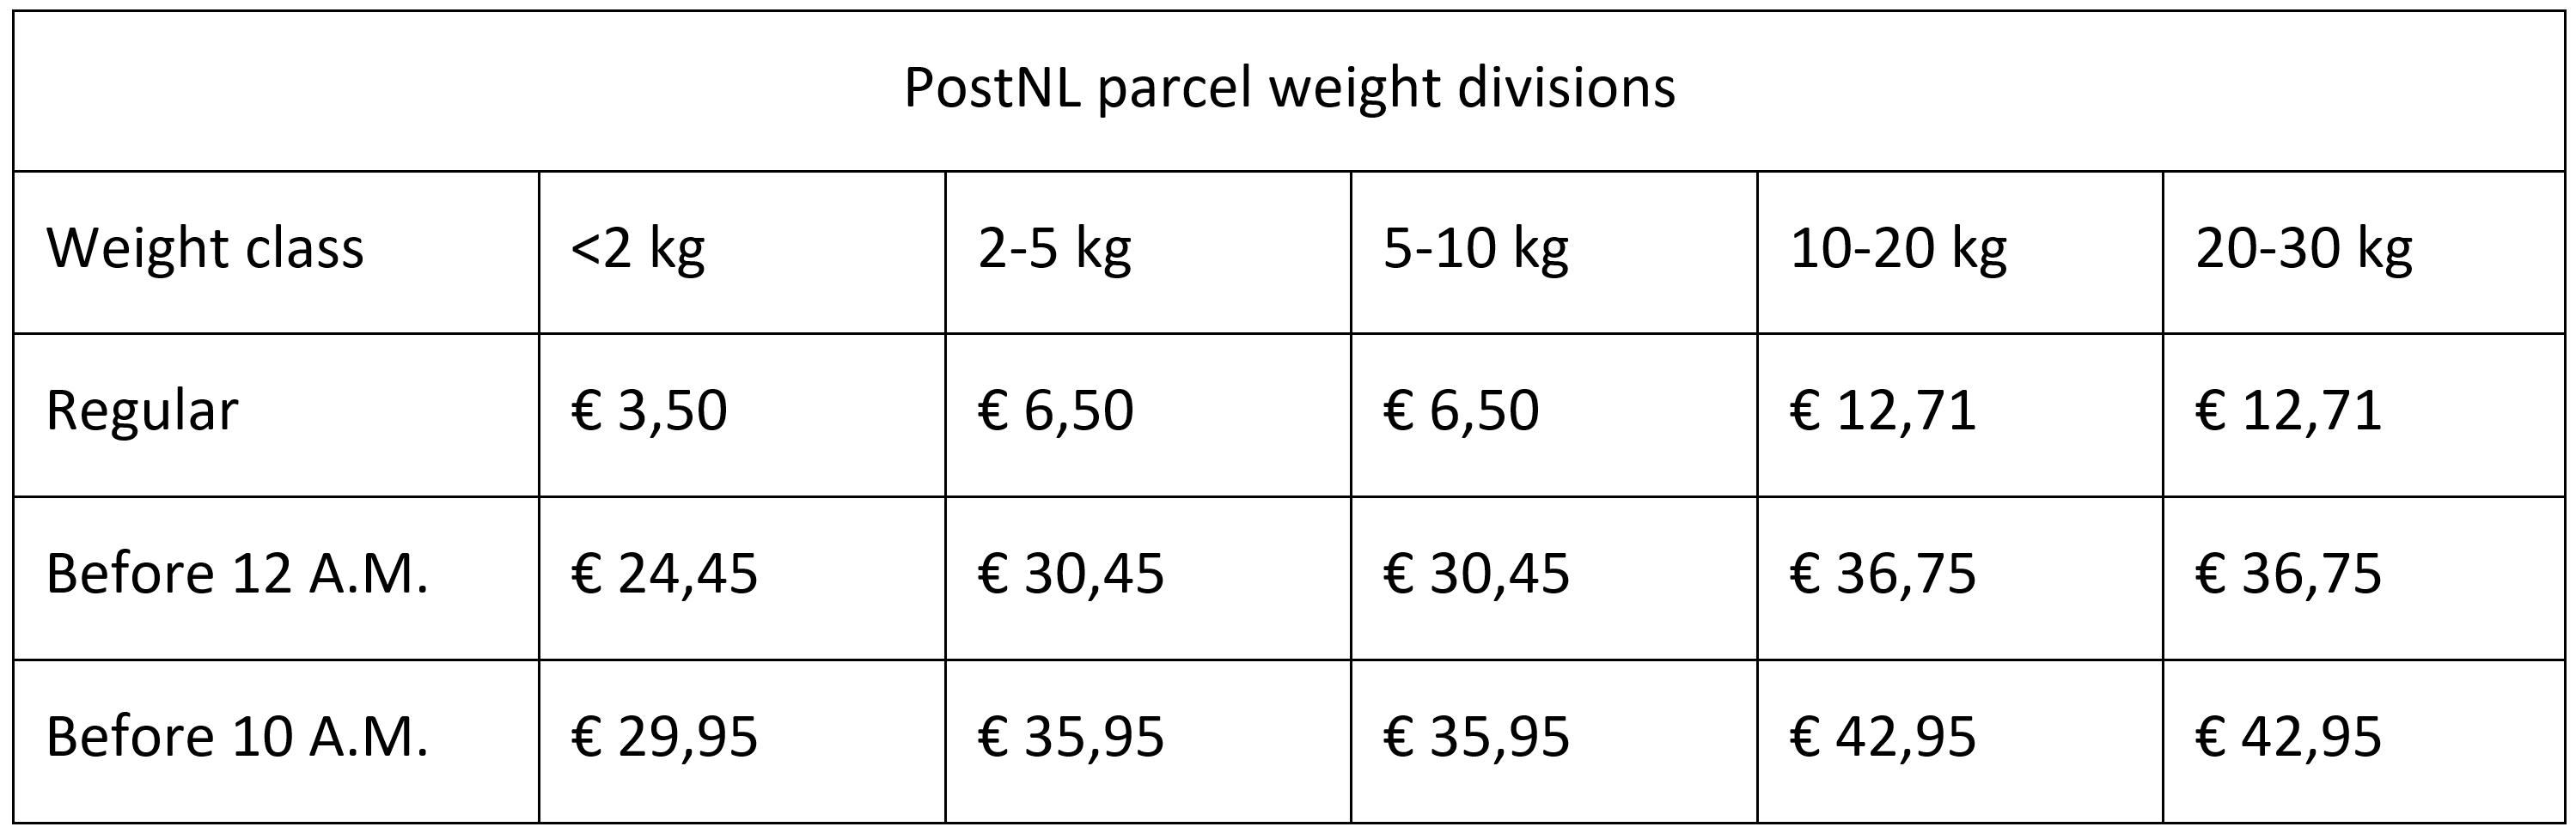 PostNLWeightDivisions.PNG